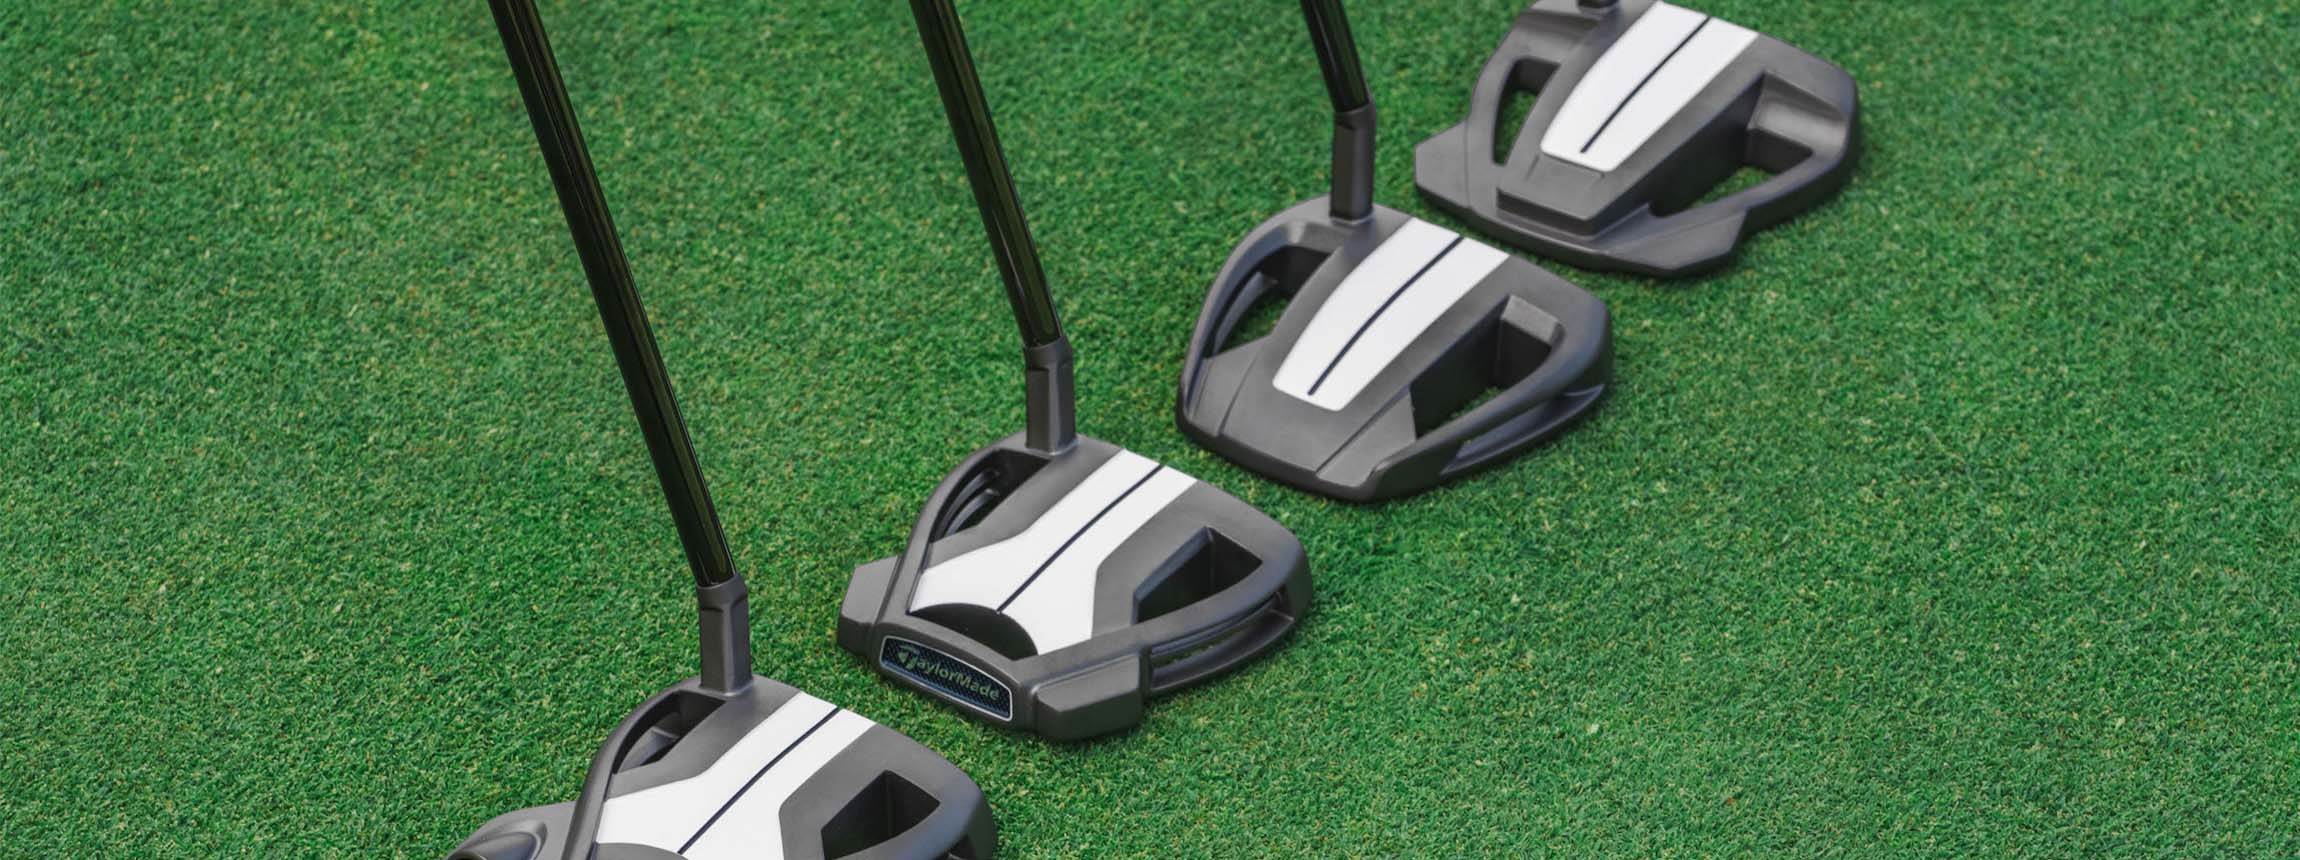 Taylormade spider putters